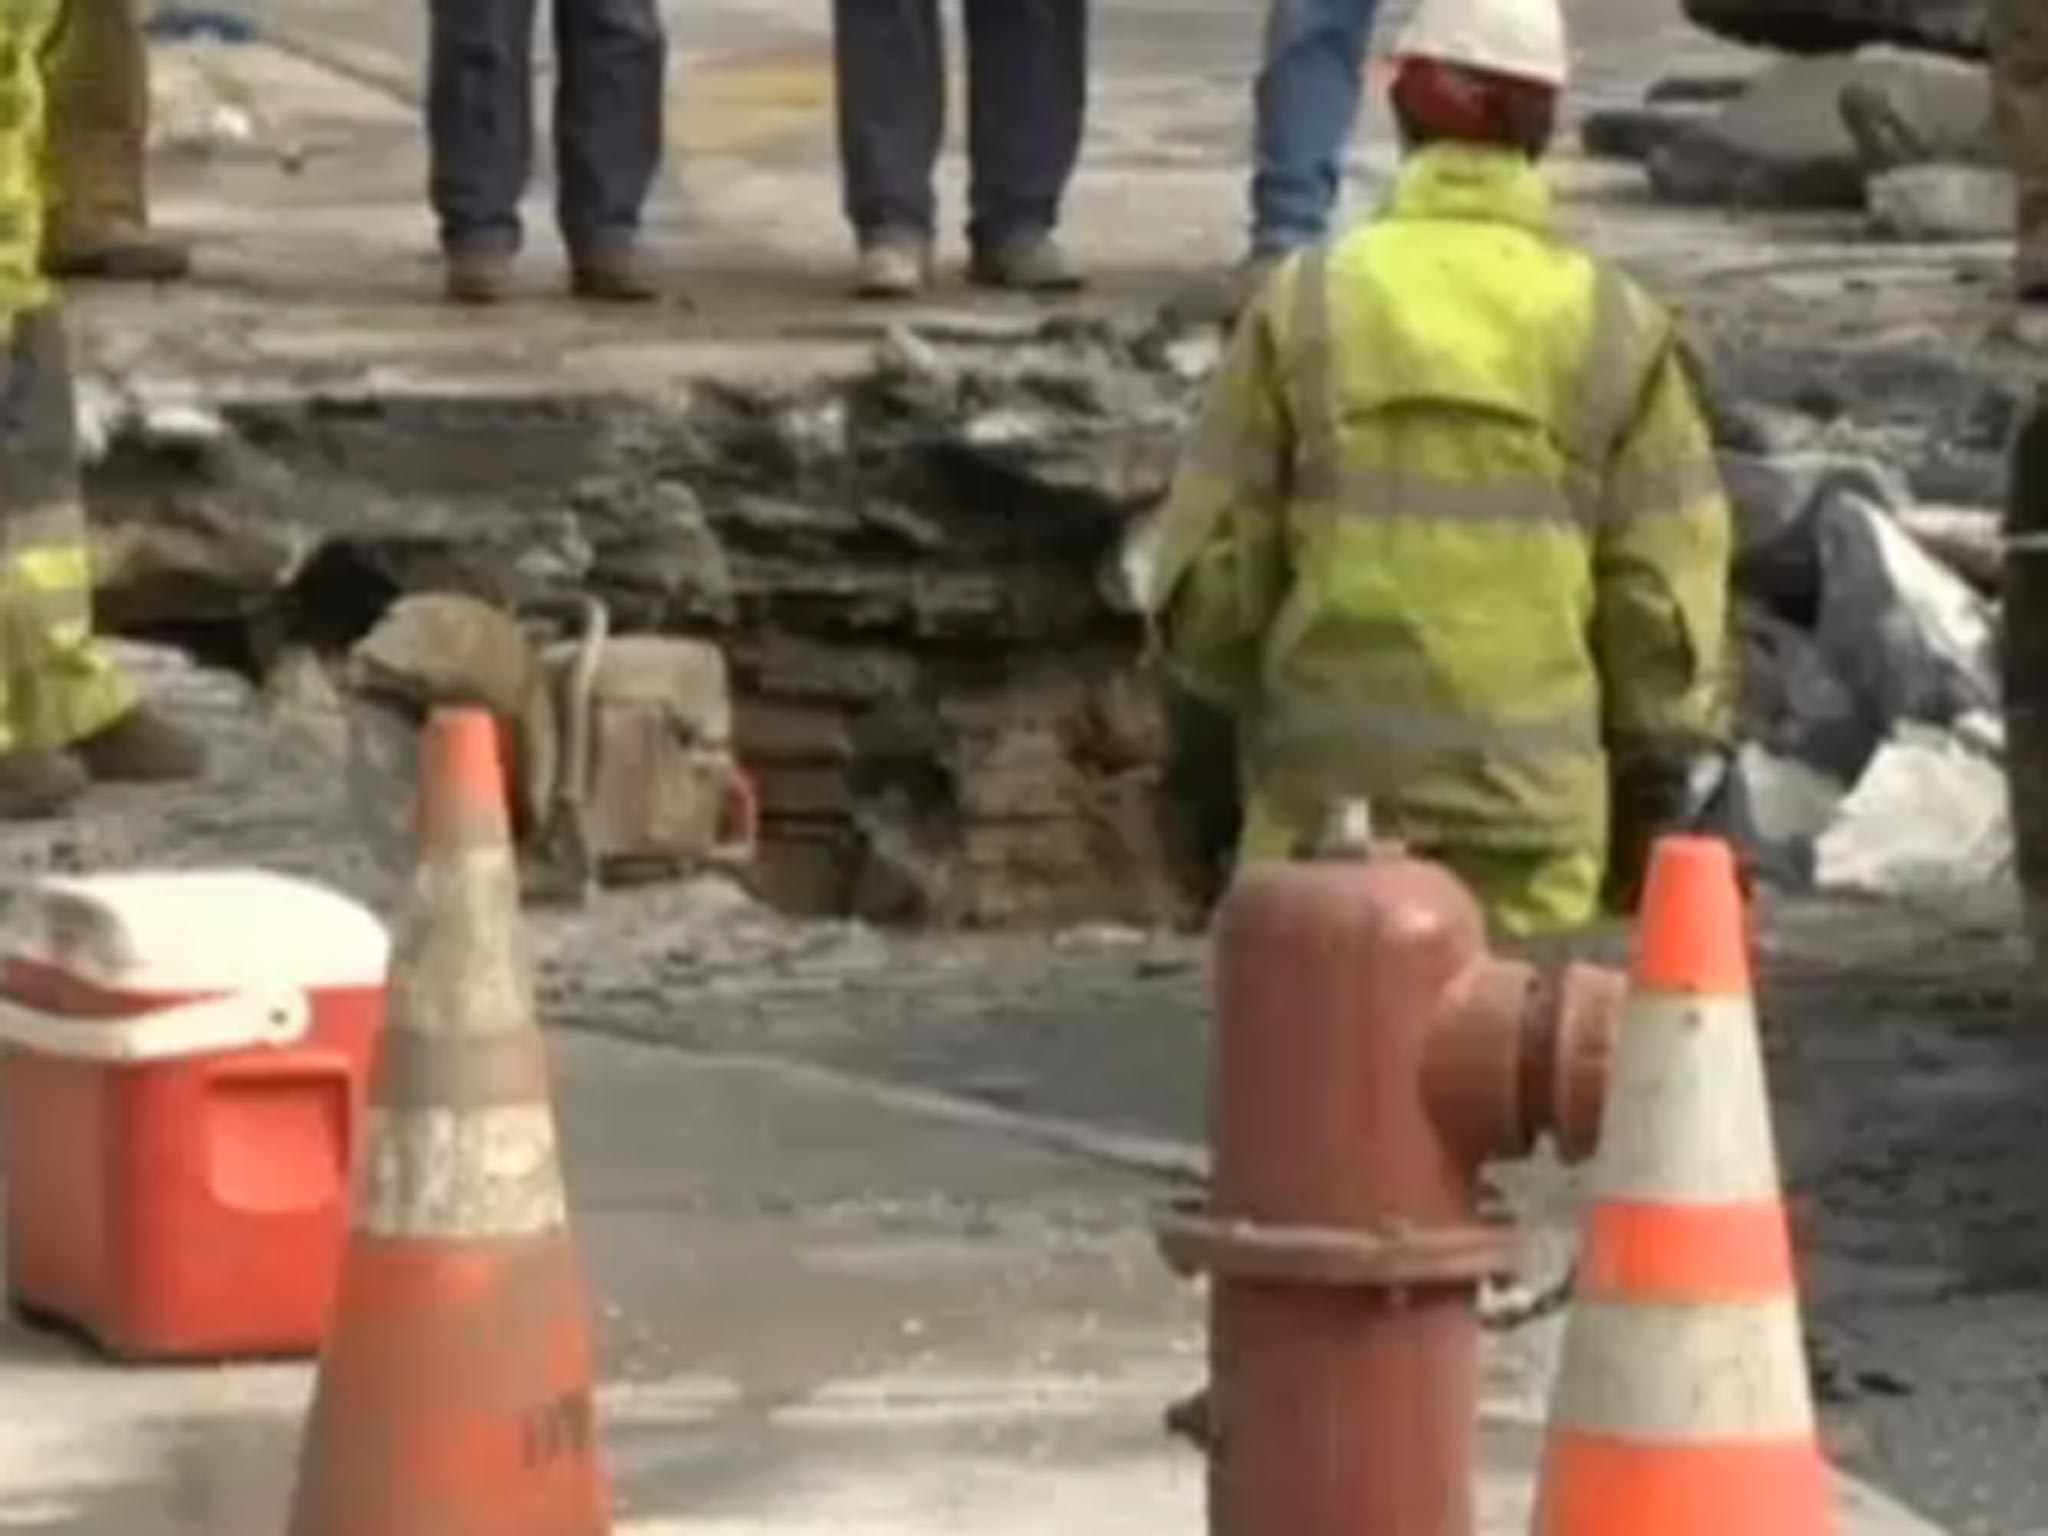 A worker stands in the sinkhole which opened up on a street in downtown Detroit